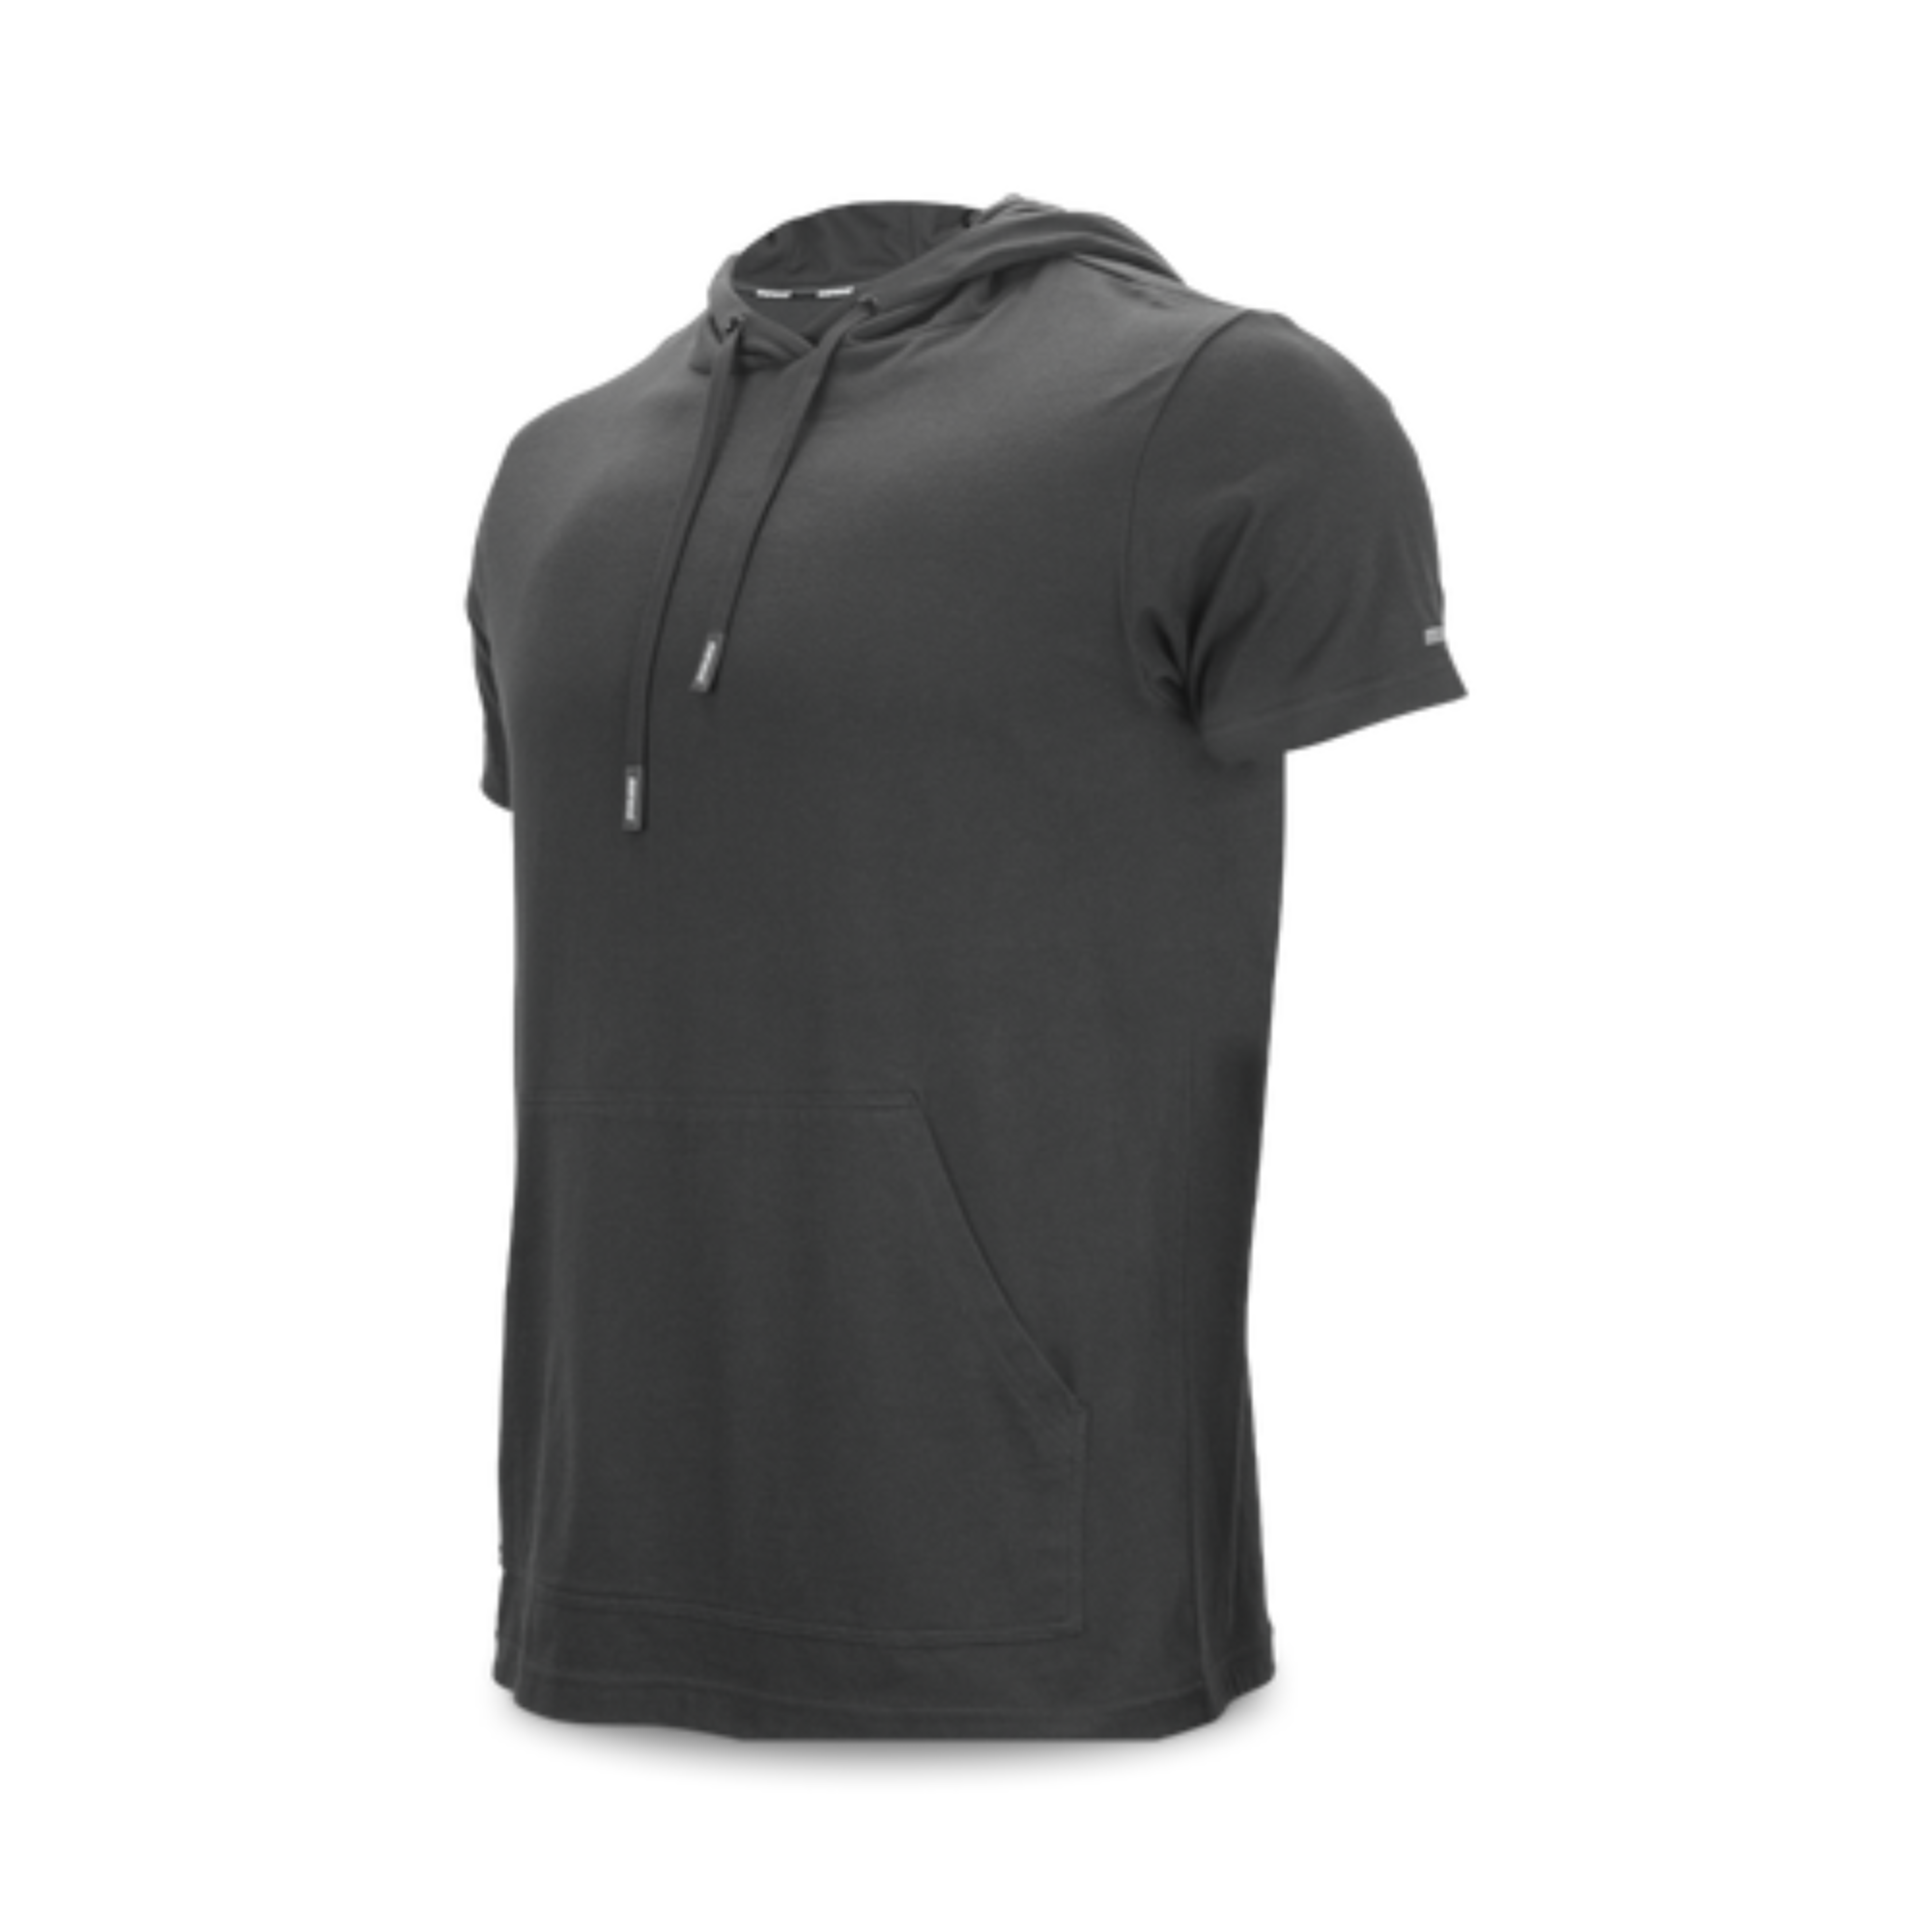 Marucci Forge Short Sleeve Hoodie Gray